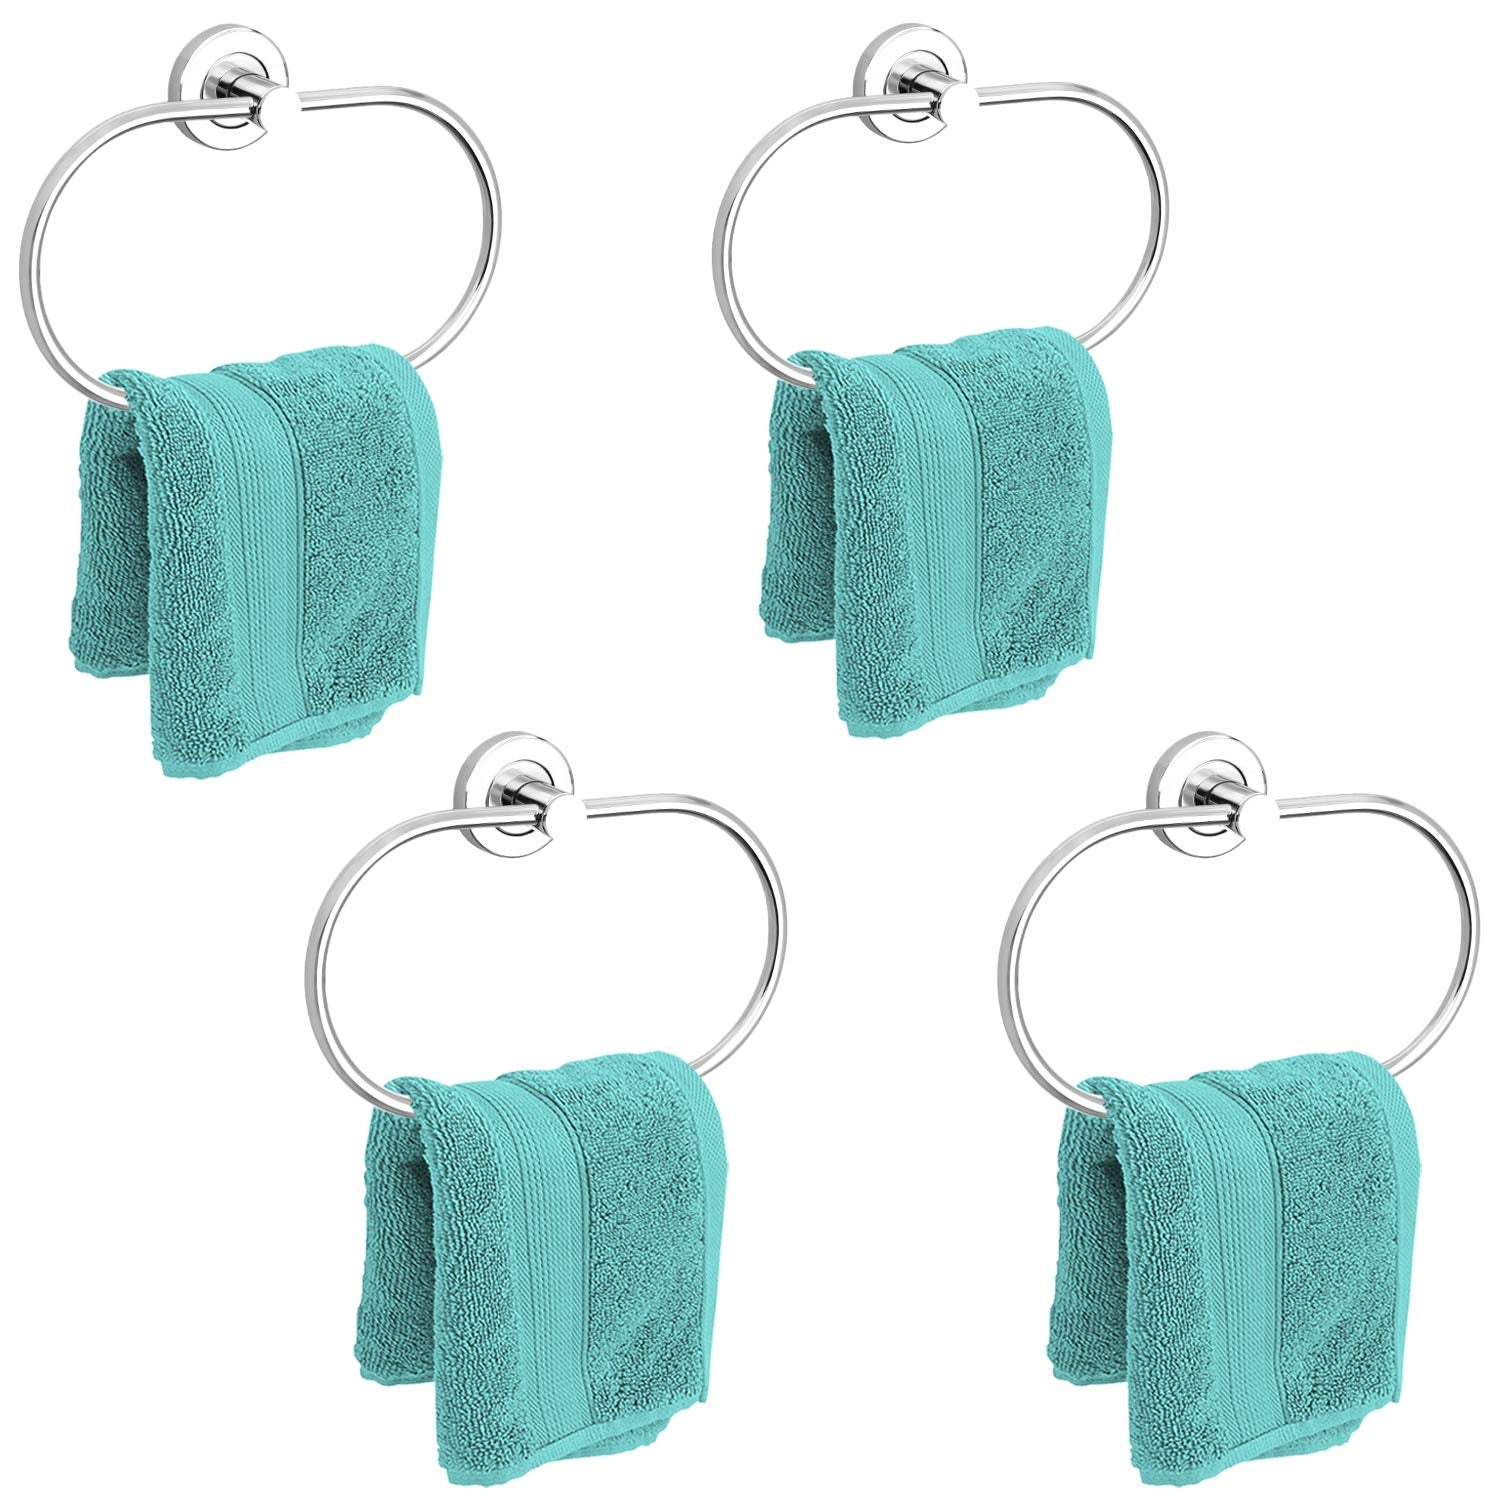 Plantex Stainless Steel Towel Ring for Bathroom/Wash Basin/Napkin-Towel Hanger/Bathroom Accessories (Chrome-Oval) - Pack of 4